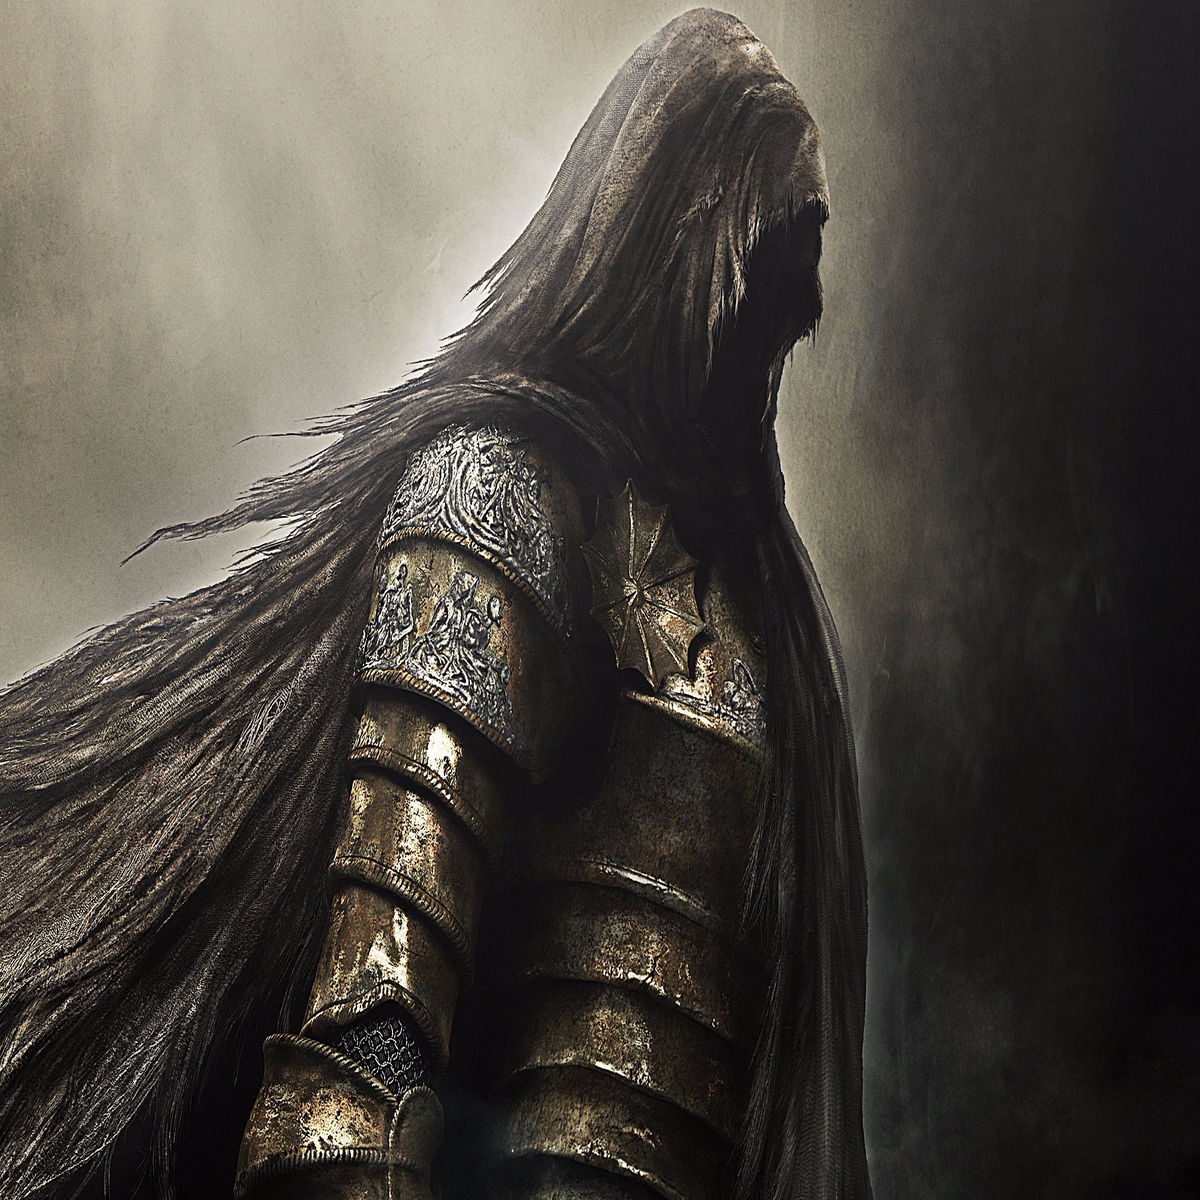 FromSoftware Dark Souls II: Scholar of the First Sin PlayStation 4 PS4